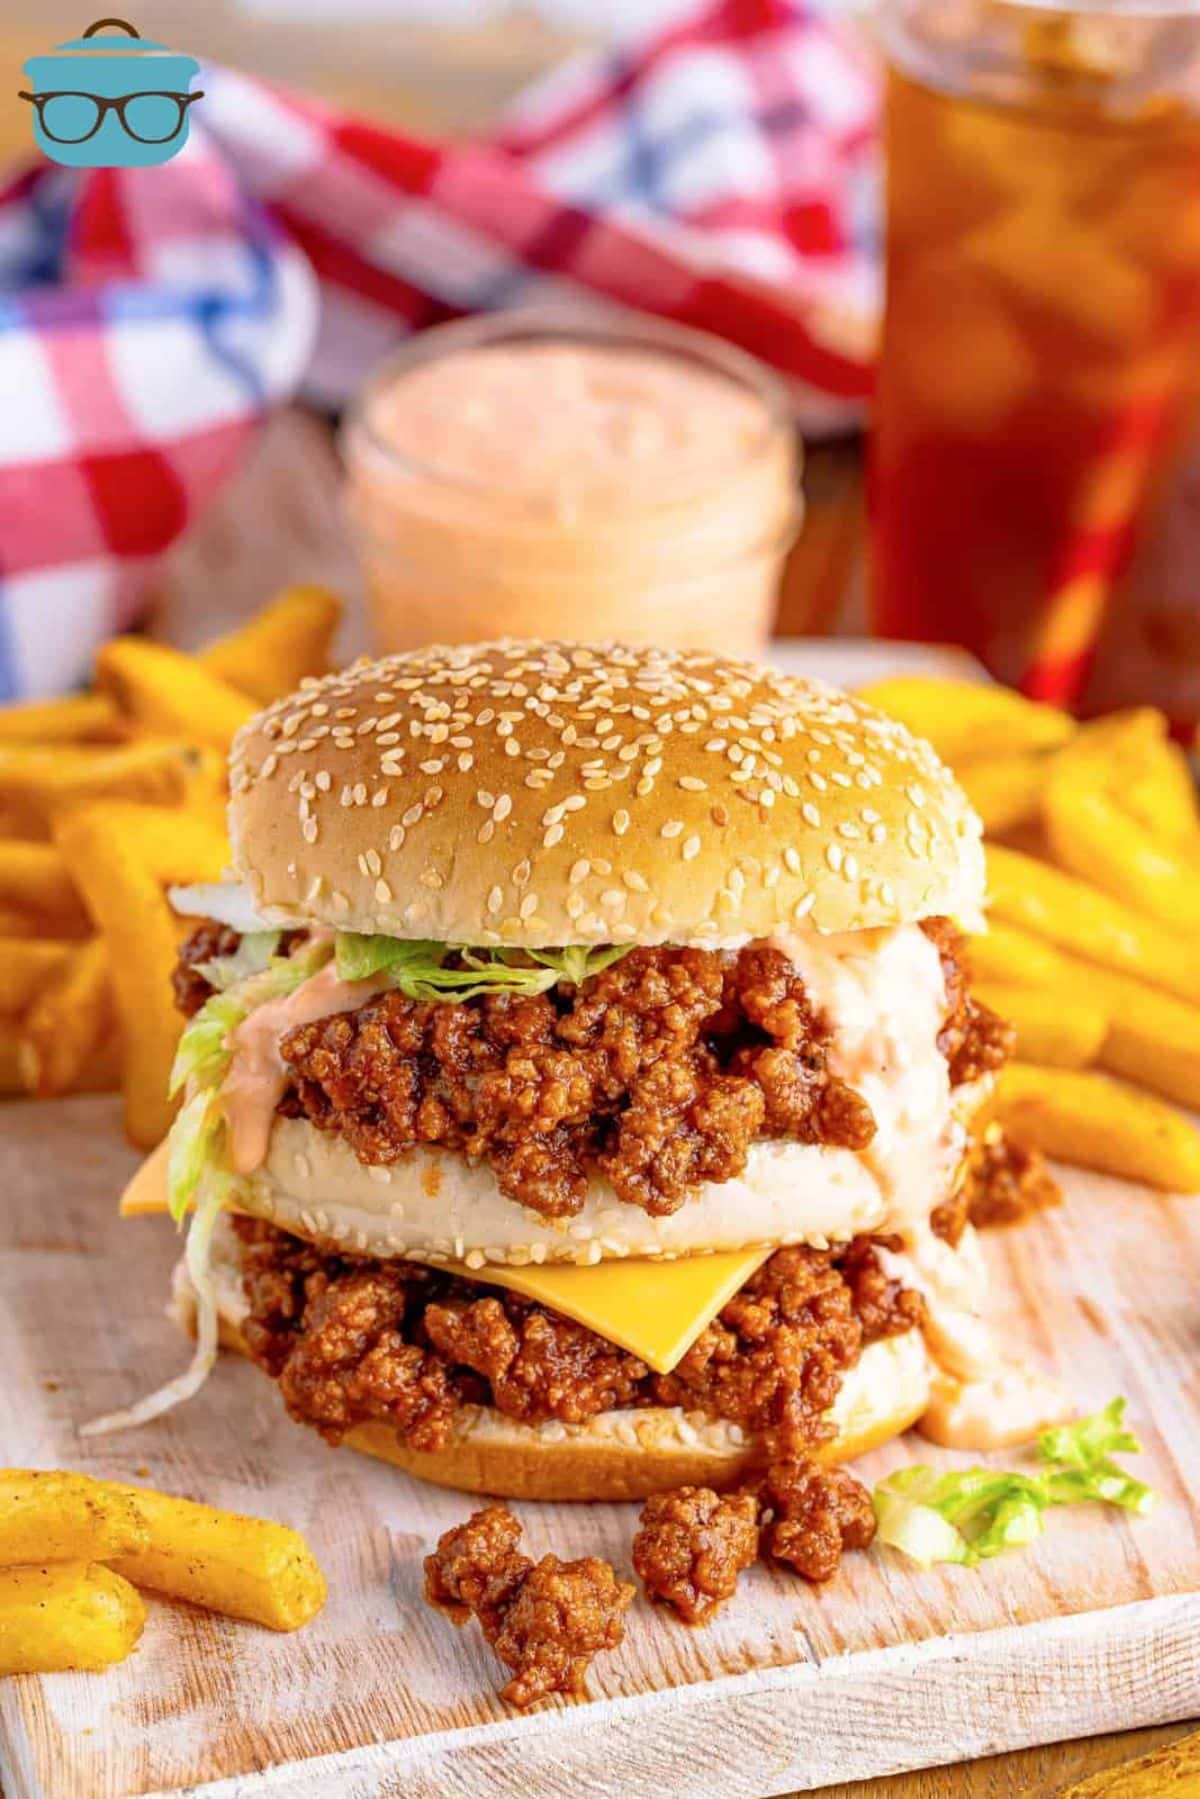 Big mac sloppy joes with fries on a wooden cutting board.